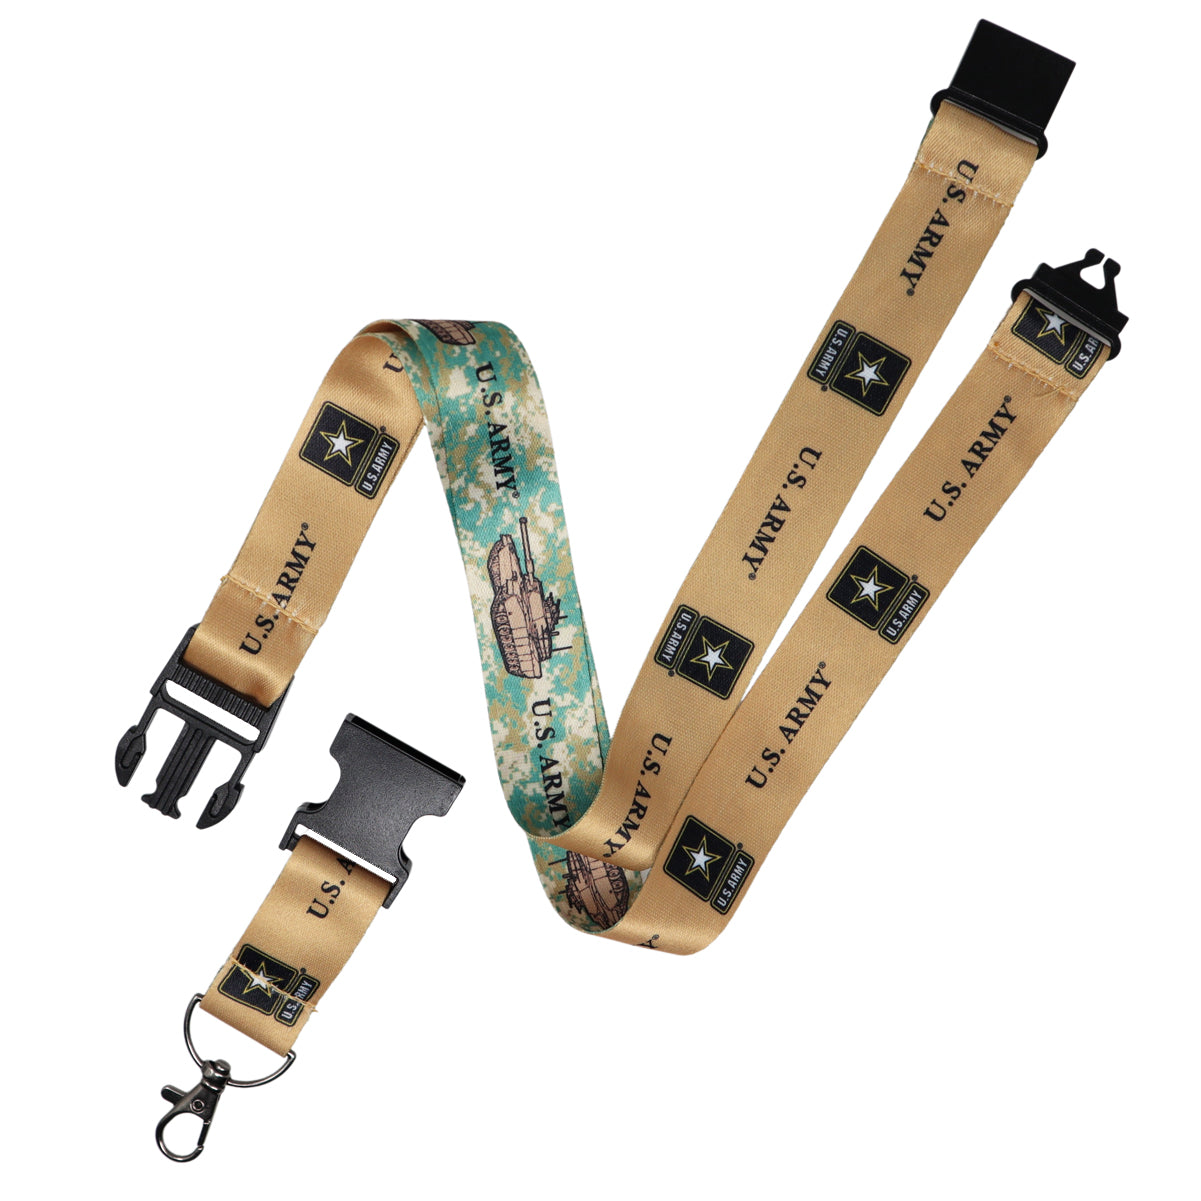 Strong Dual Detachable Clip Lanyard ID Neck Strap with Buckle